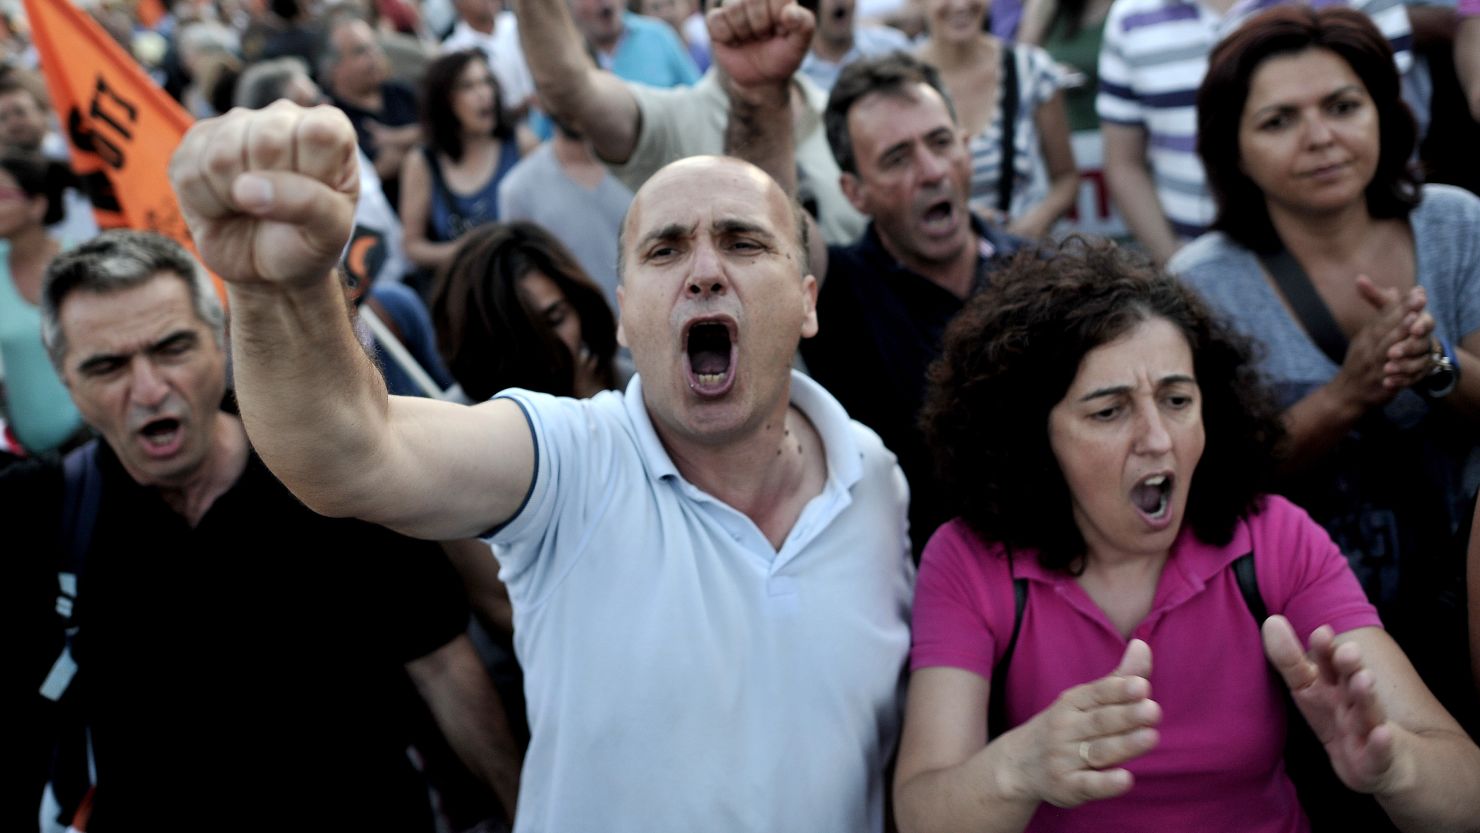 Municipality employees demonstrate in front of the Greek Parliament during a vote on more austerity measures.